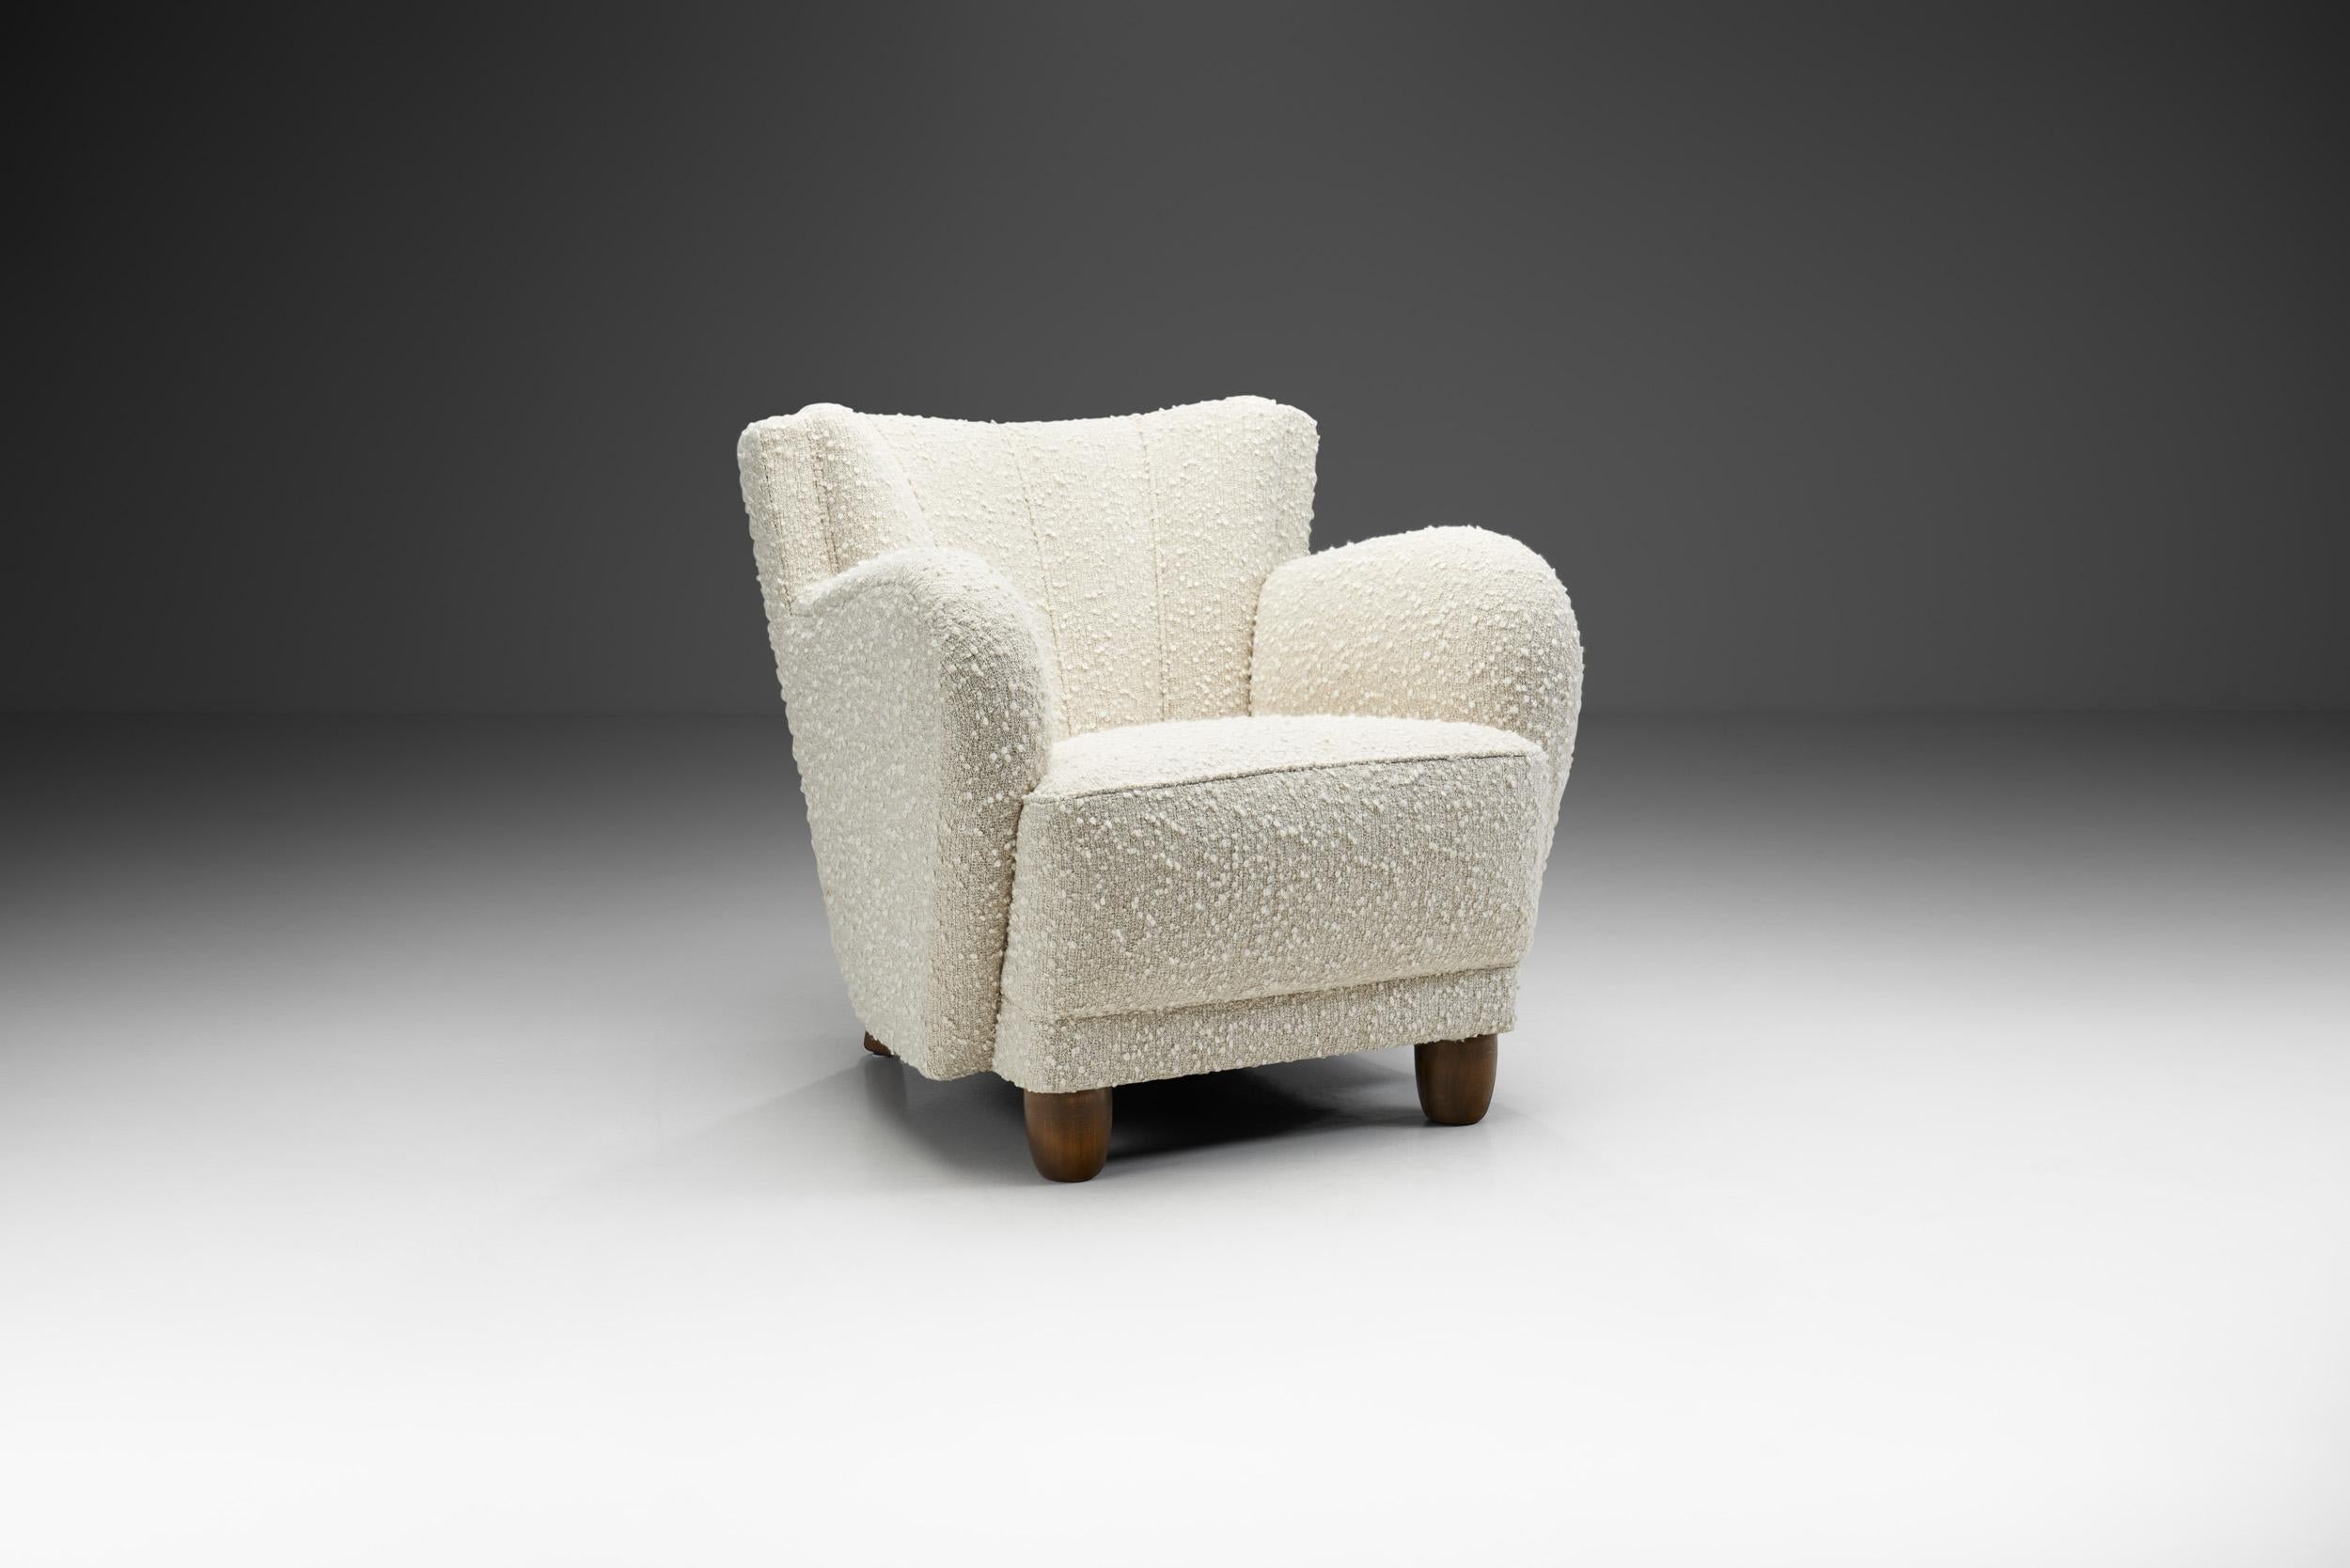 Mid-20th Century Danish Armchair with Stained Wood Legs and Bouclé Upholstery, Denmark, 1940s